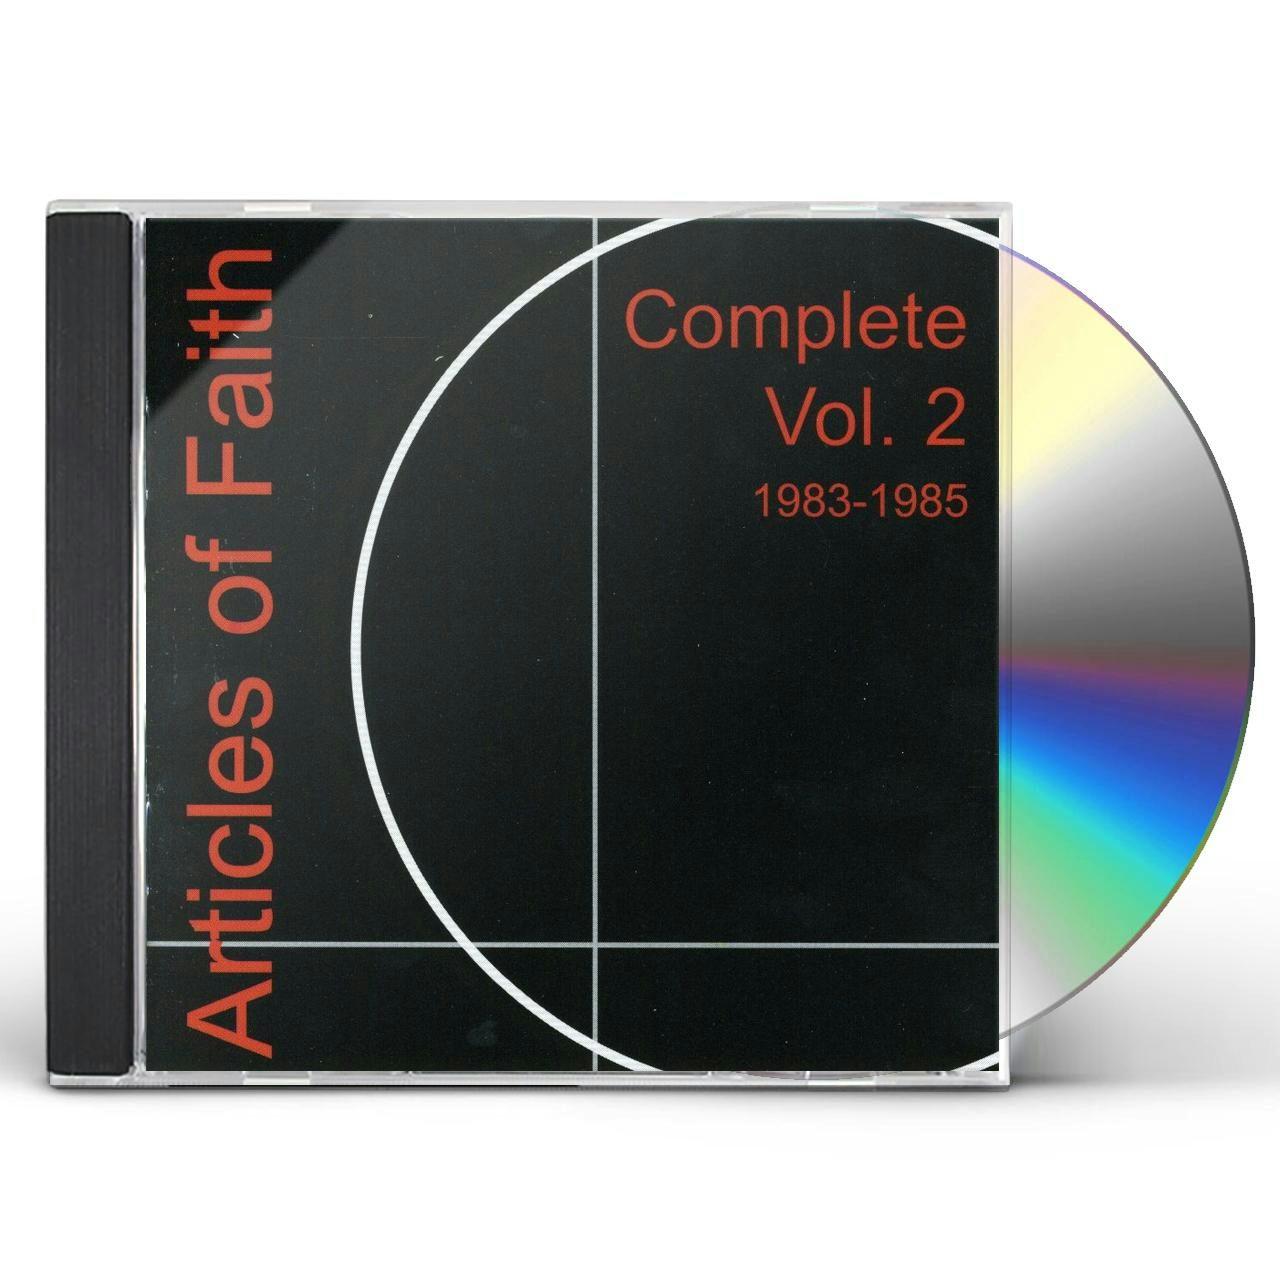 complete 2 1983-1985 cd - Articles Of Faith